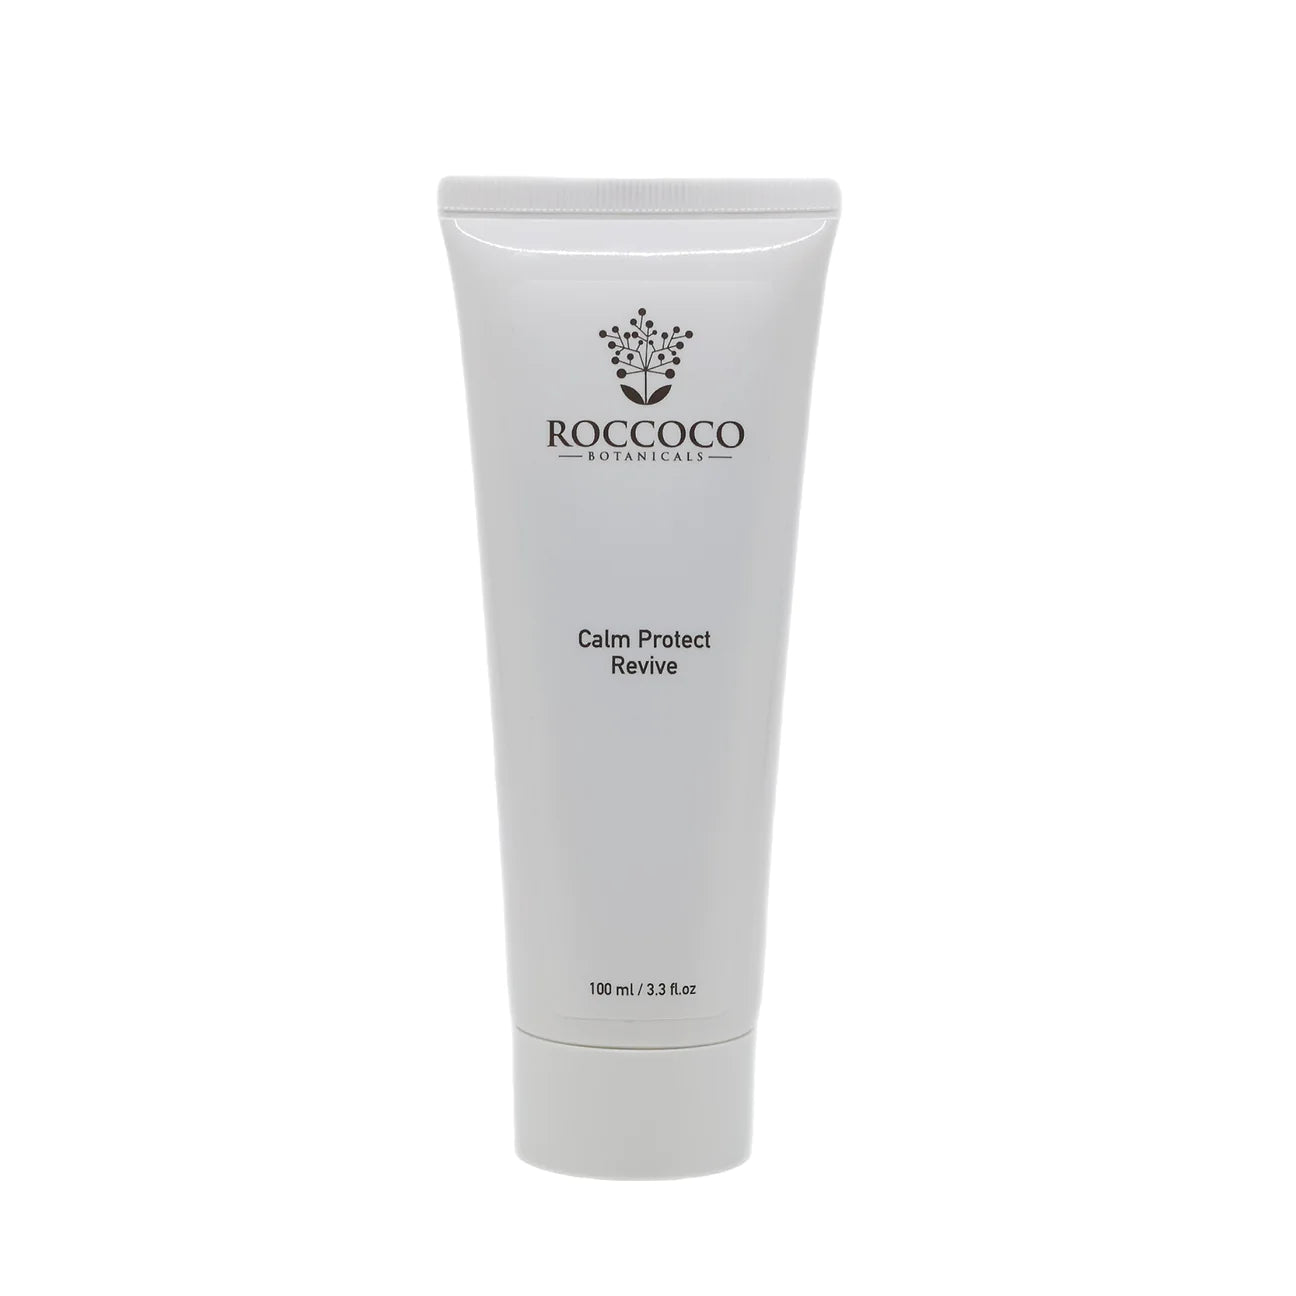 Roccoco Botanicals Calm Protect and Revive